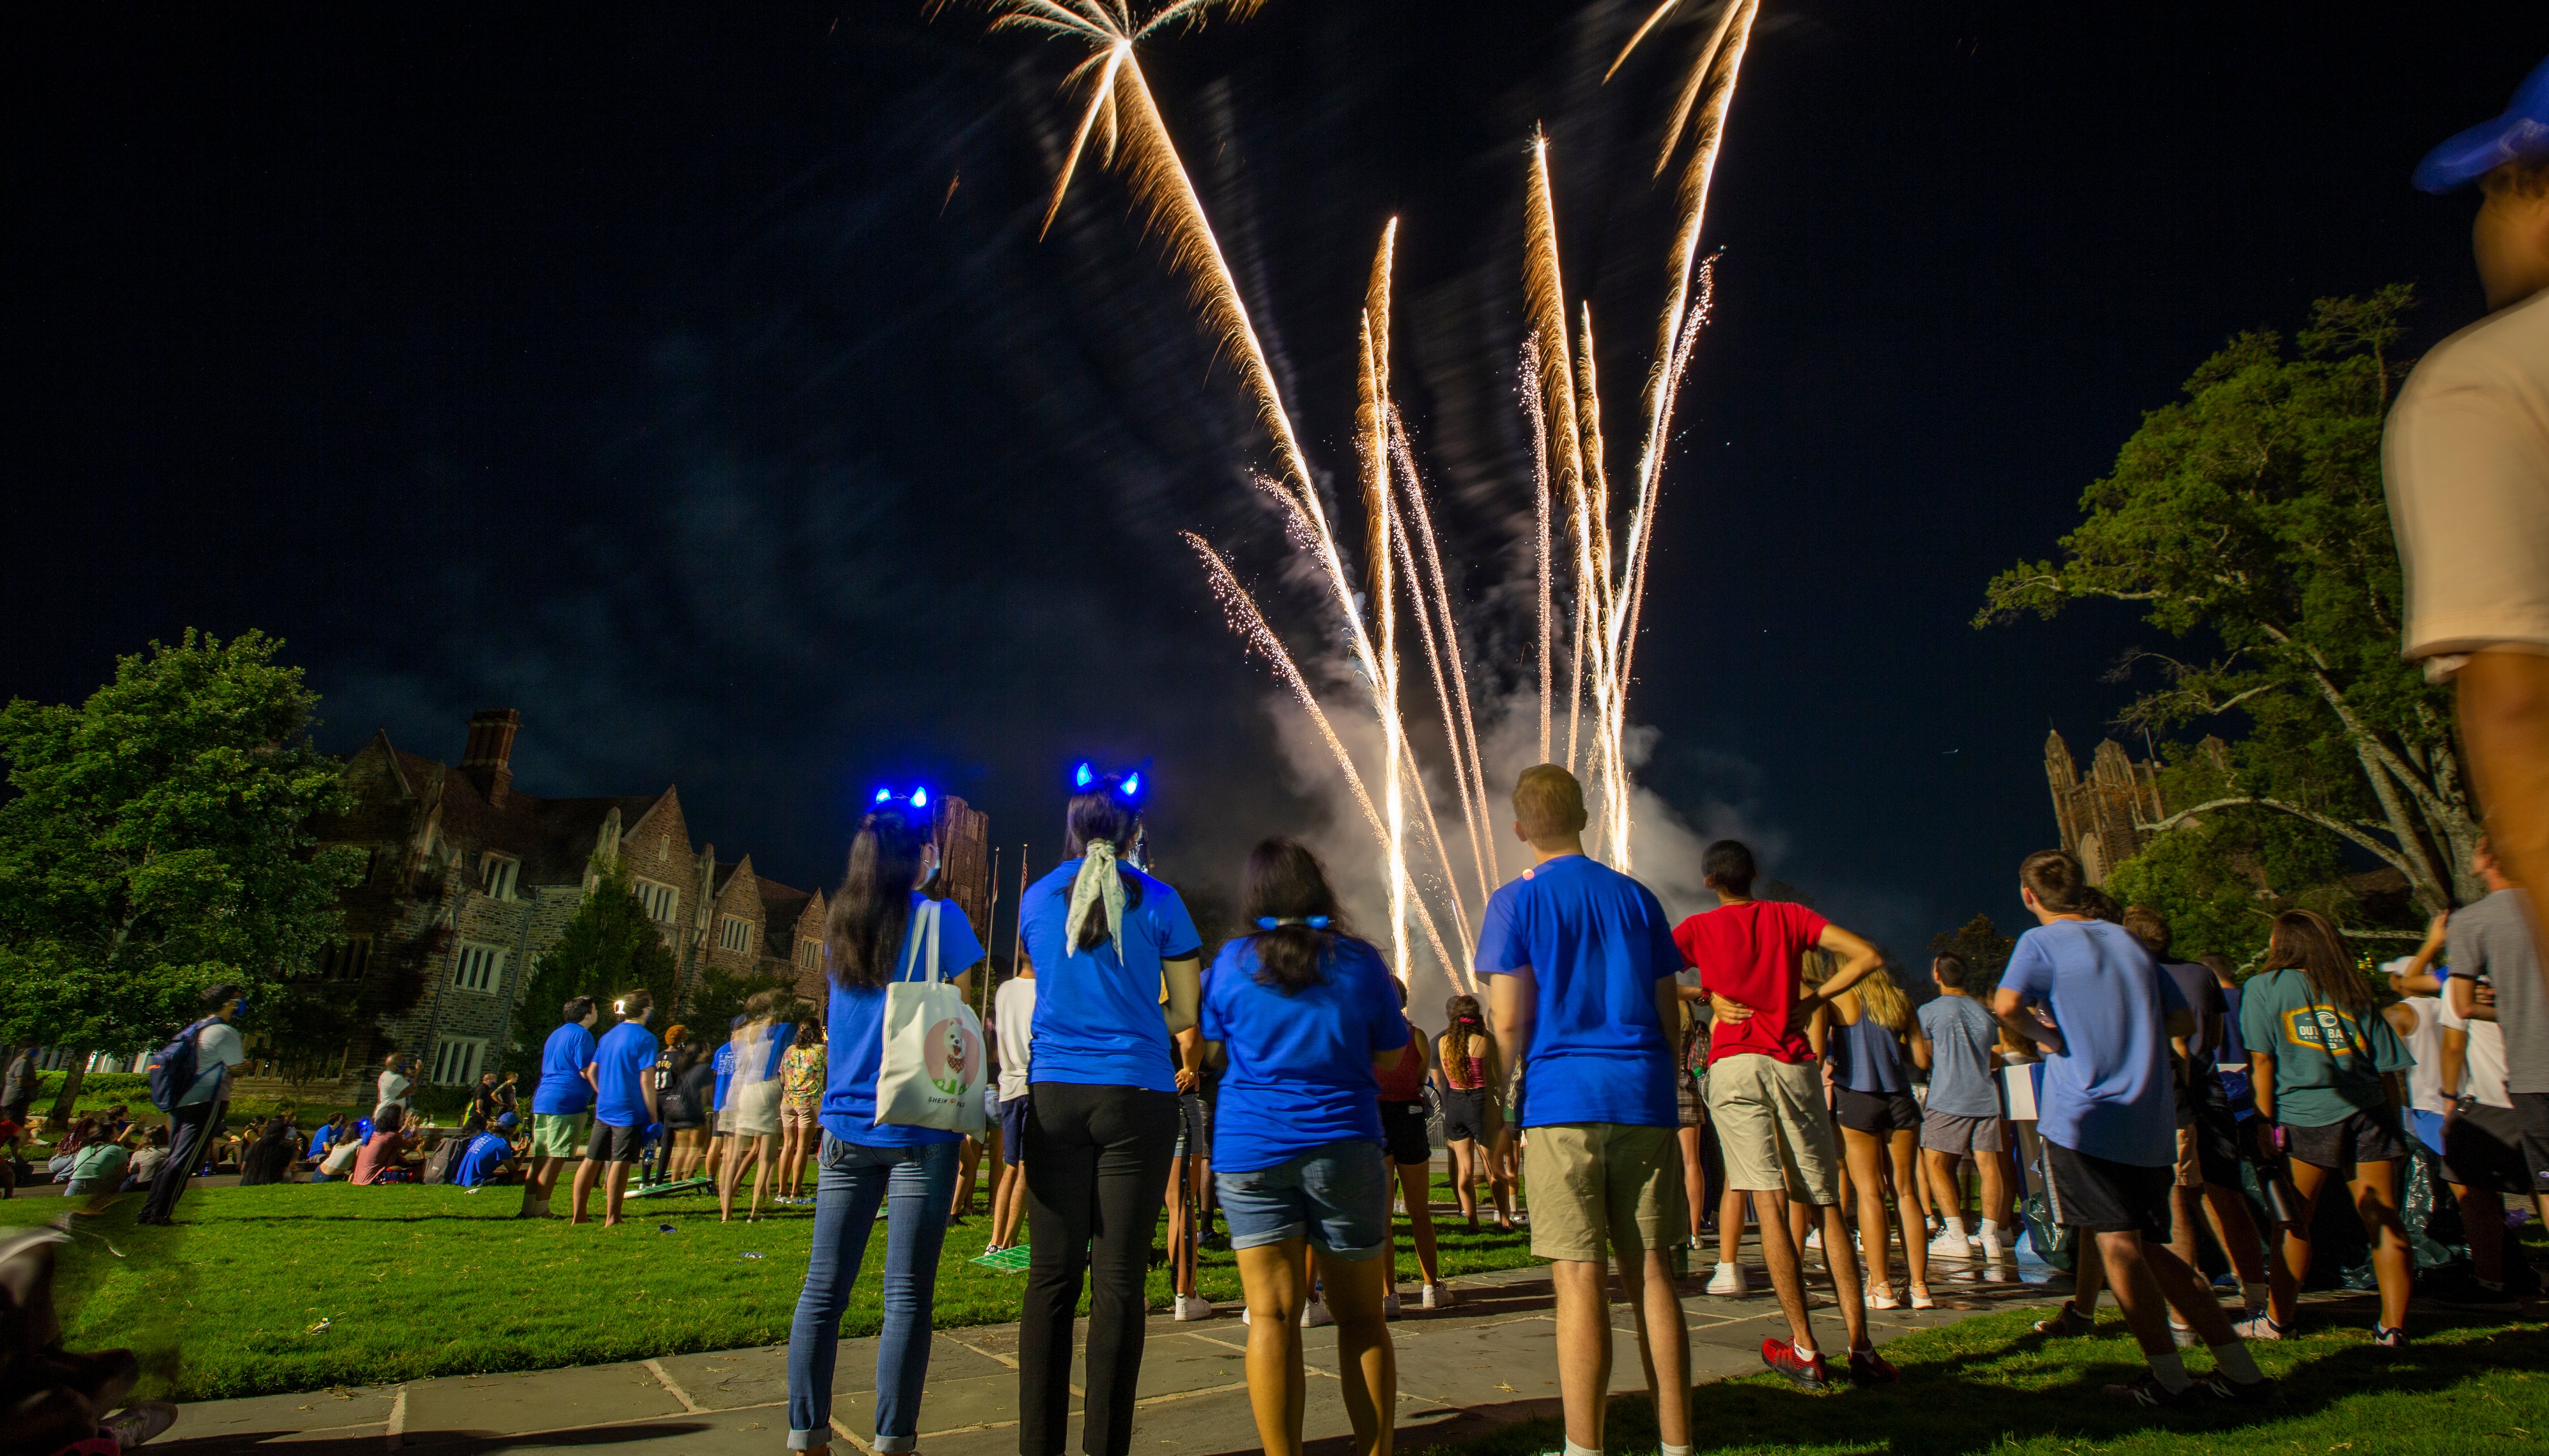 Read 21 Moments from 2021 by Duke University